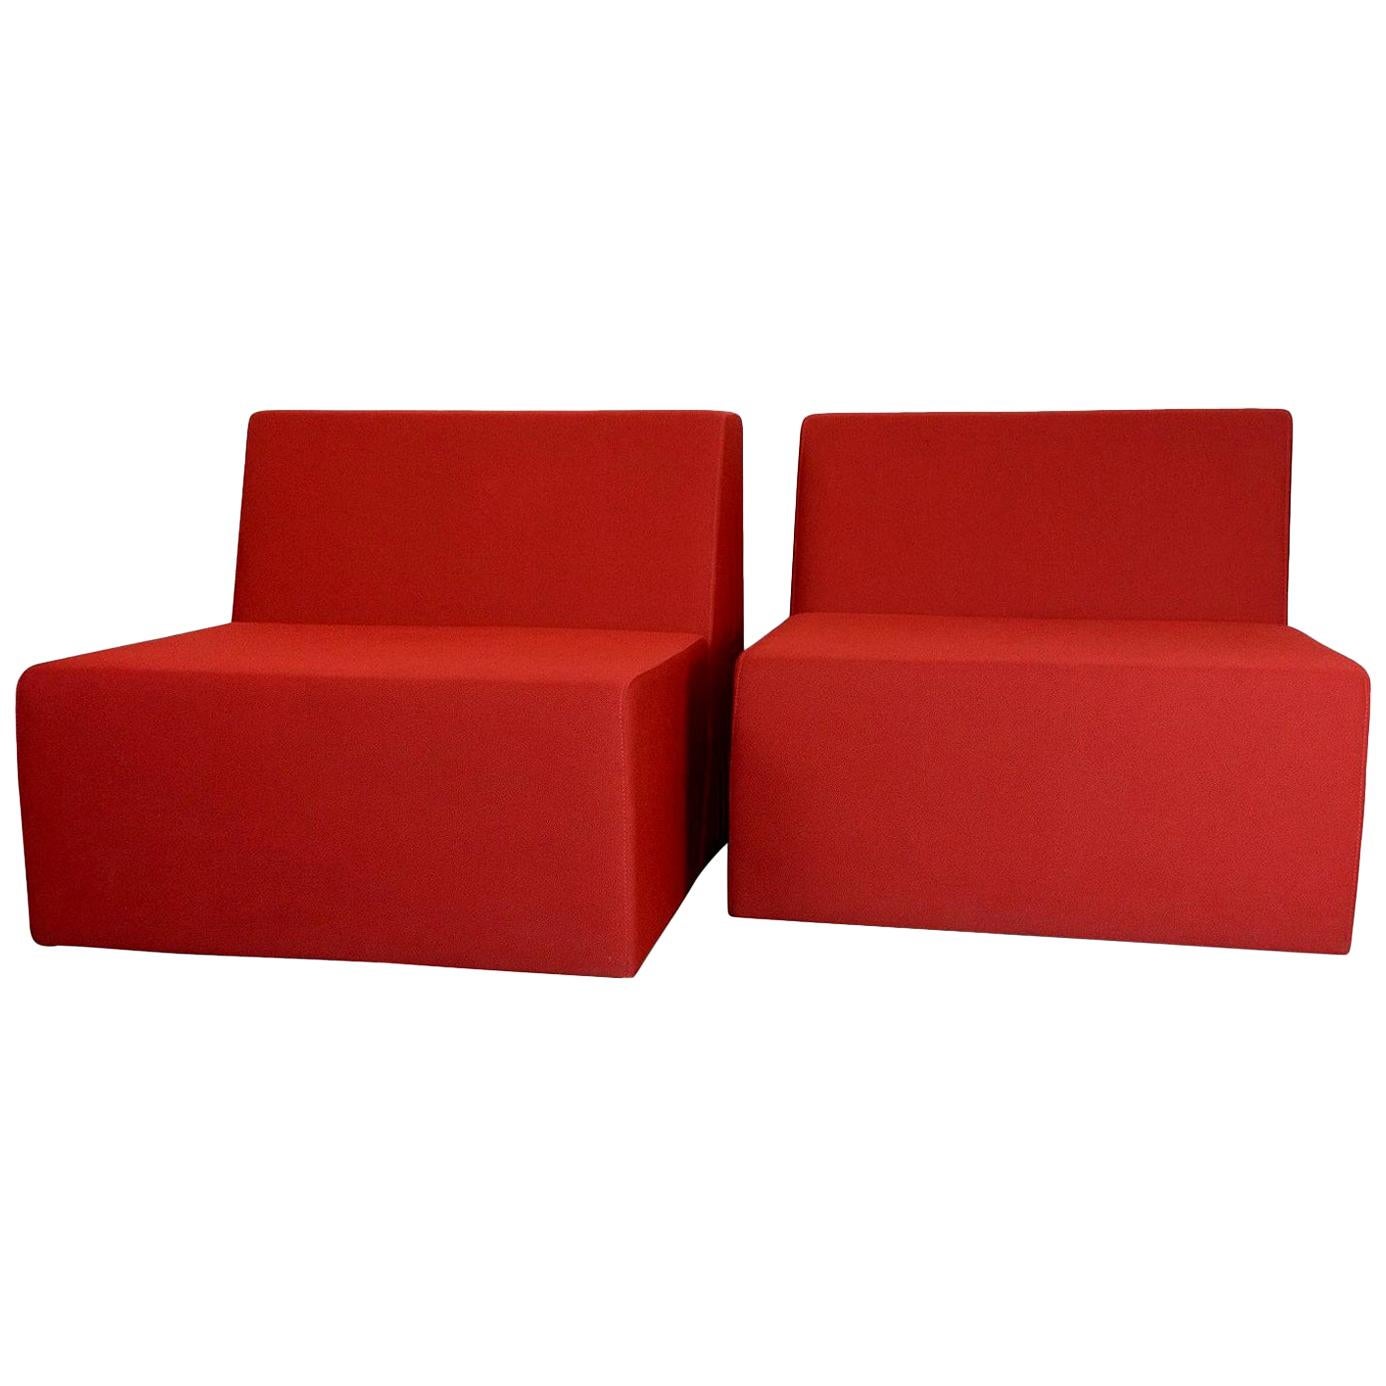 Signed Pair of Red Turnstone for Steelcase "Campfire" Modular Lounge Chairs